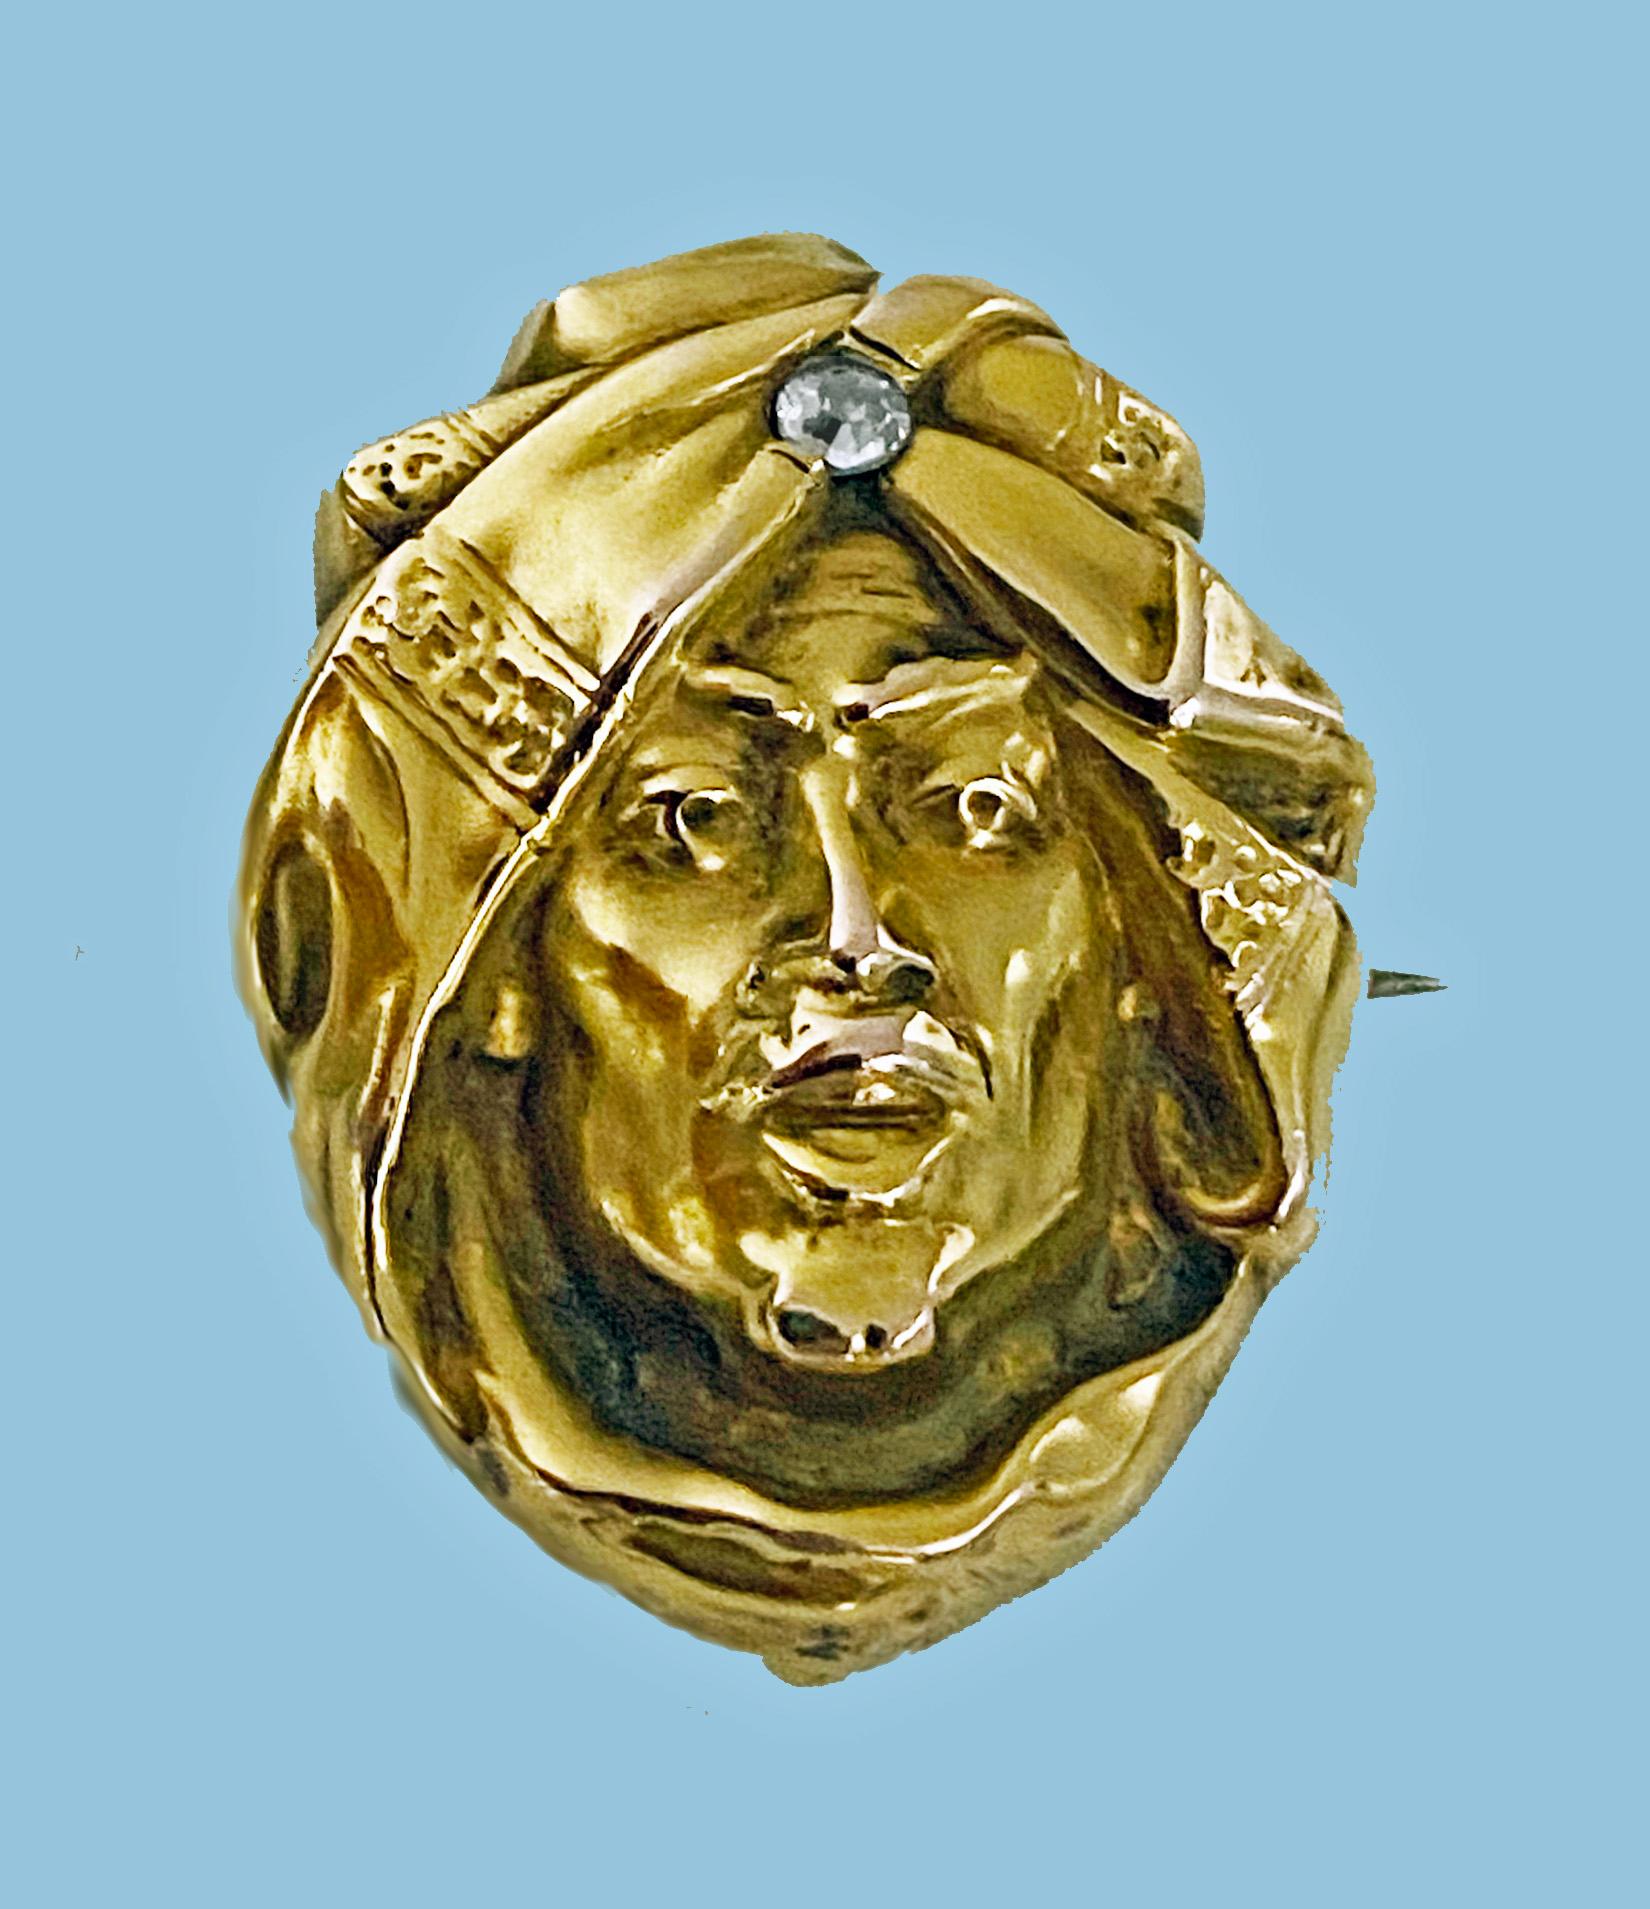 Art Nouveau 14K and Diamond Brooch, C.1900. Depicting a three dimensional profile with turban headdress inset with small old mine cut diamond. Pin and hook fitment to reverse that was used to attach a locket, charm or jewel or watch. Measures: 1.00